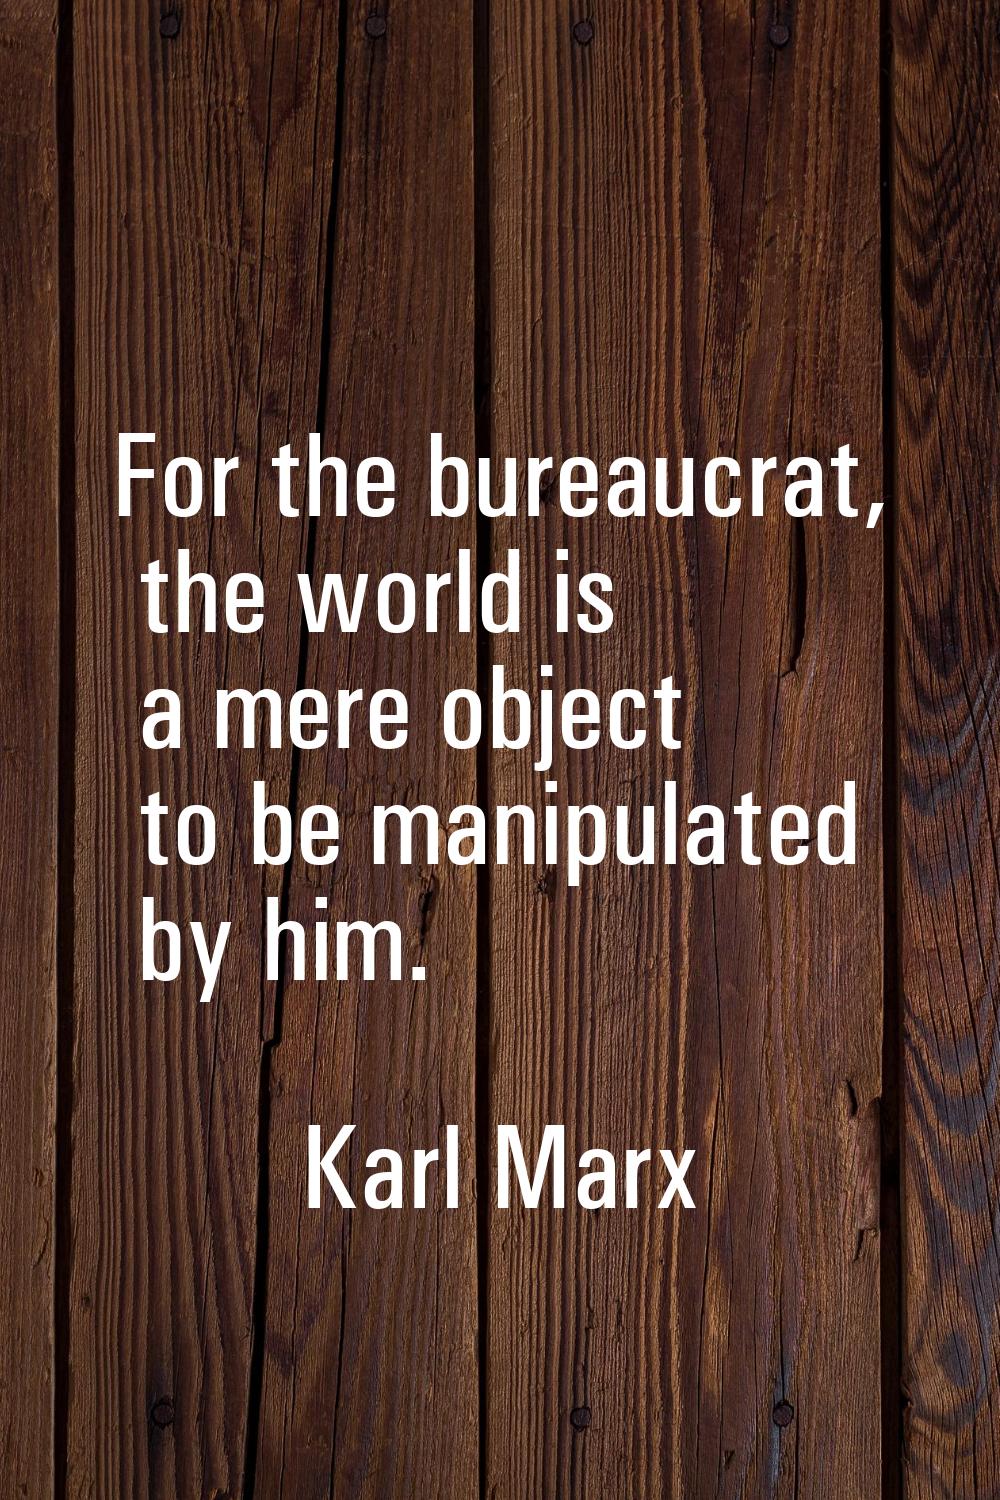 For the bureaucrat, the world is a mere object to be manipulated by him.